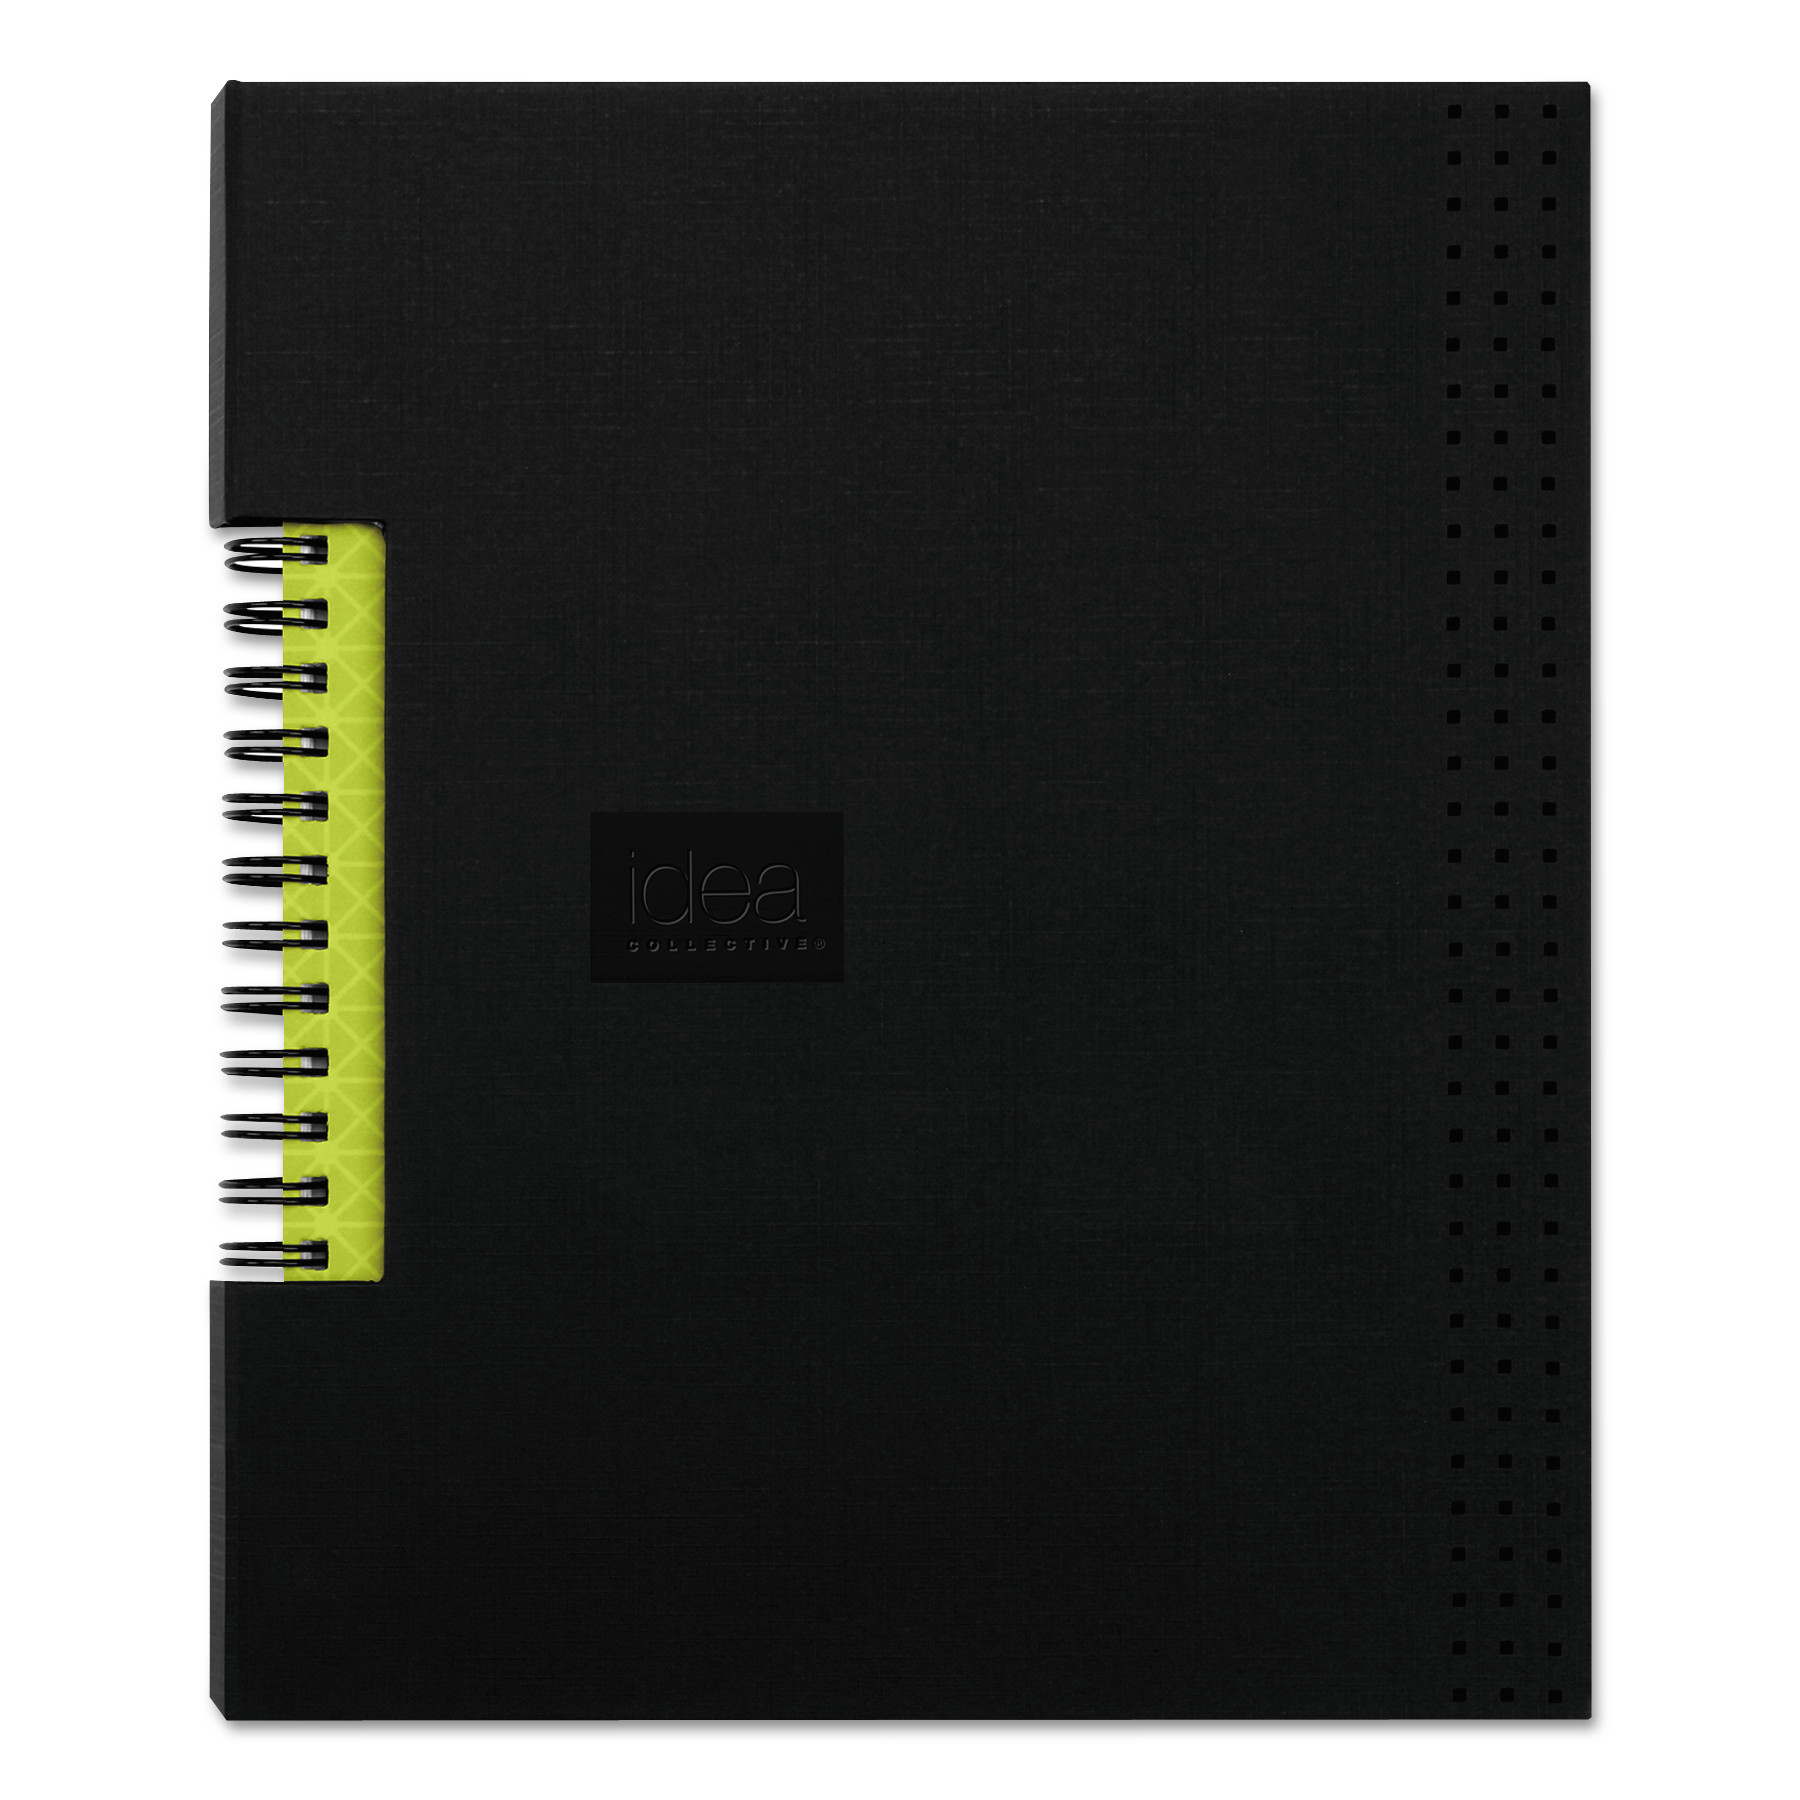  Oxford 56897 Idea Collective Professional Wirebound Hardcover Notebook, 5 7/8 x 8 1/4, Black (TOP56897) 